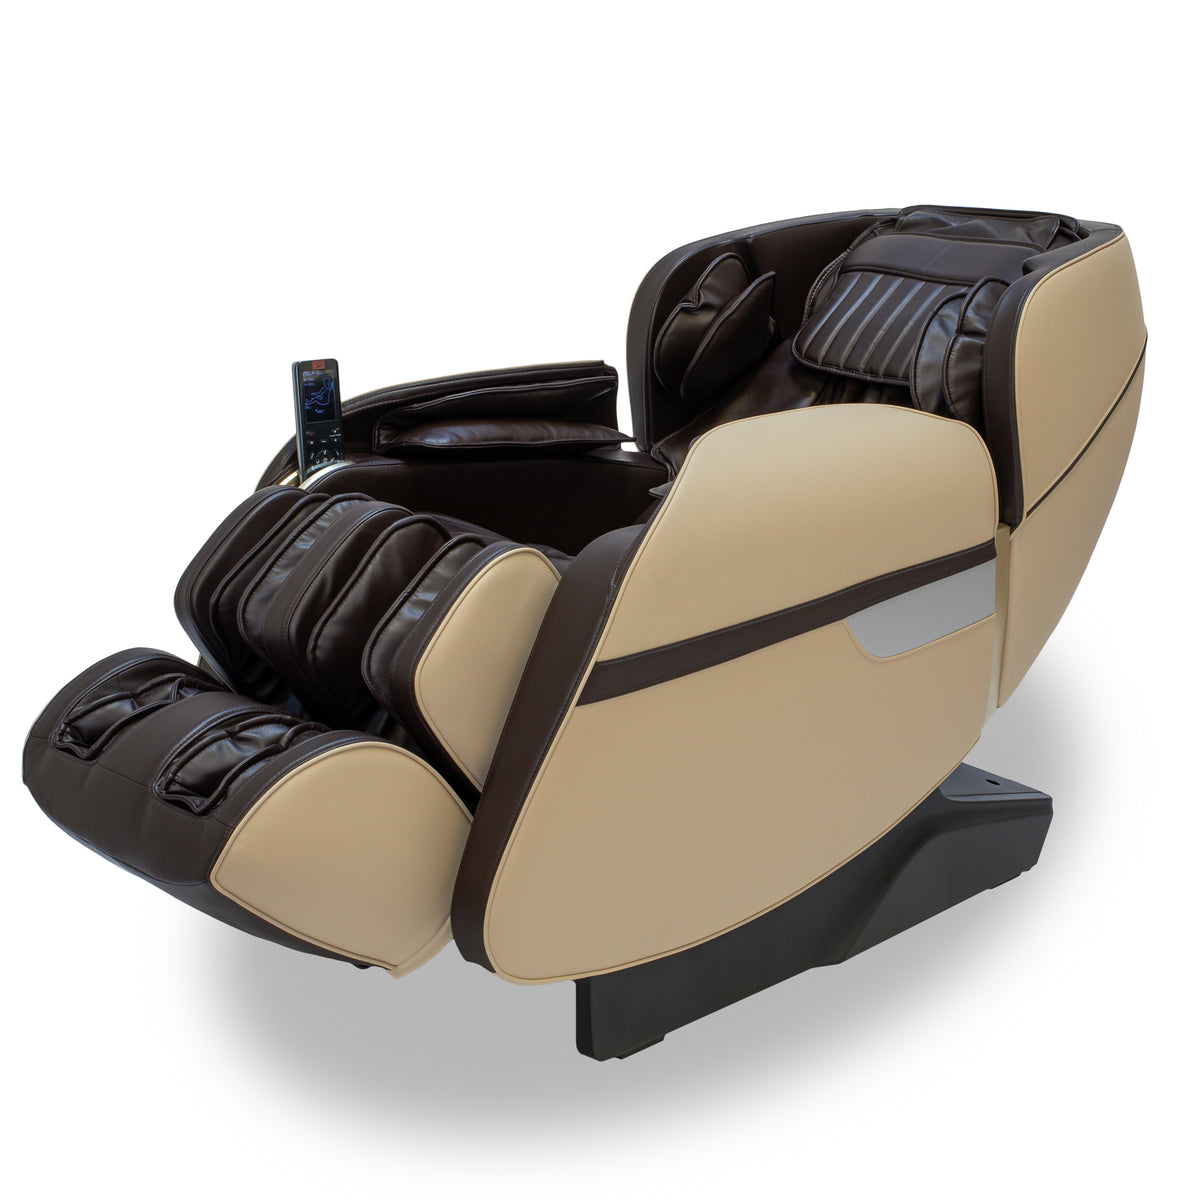 Fujisan MK-9169 3D Massage Chair with Zero Gravity and Heating Functio